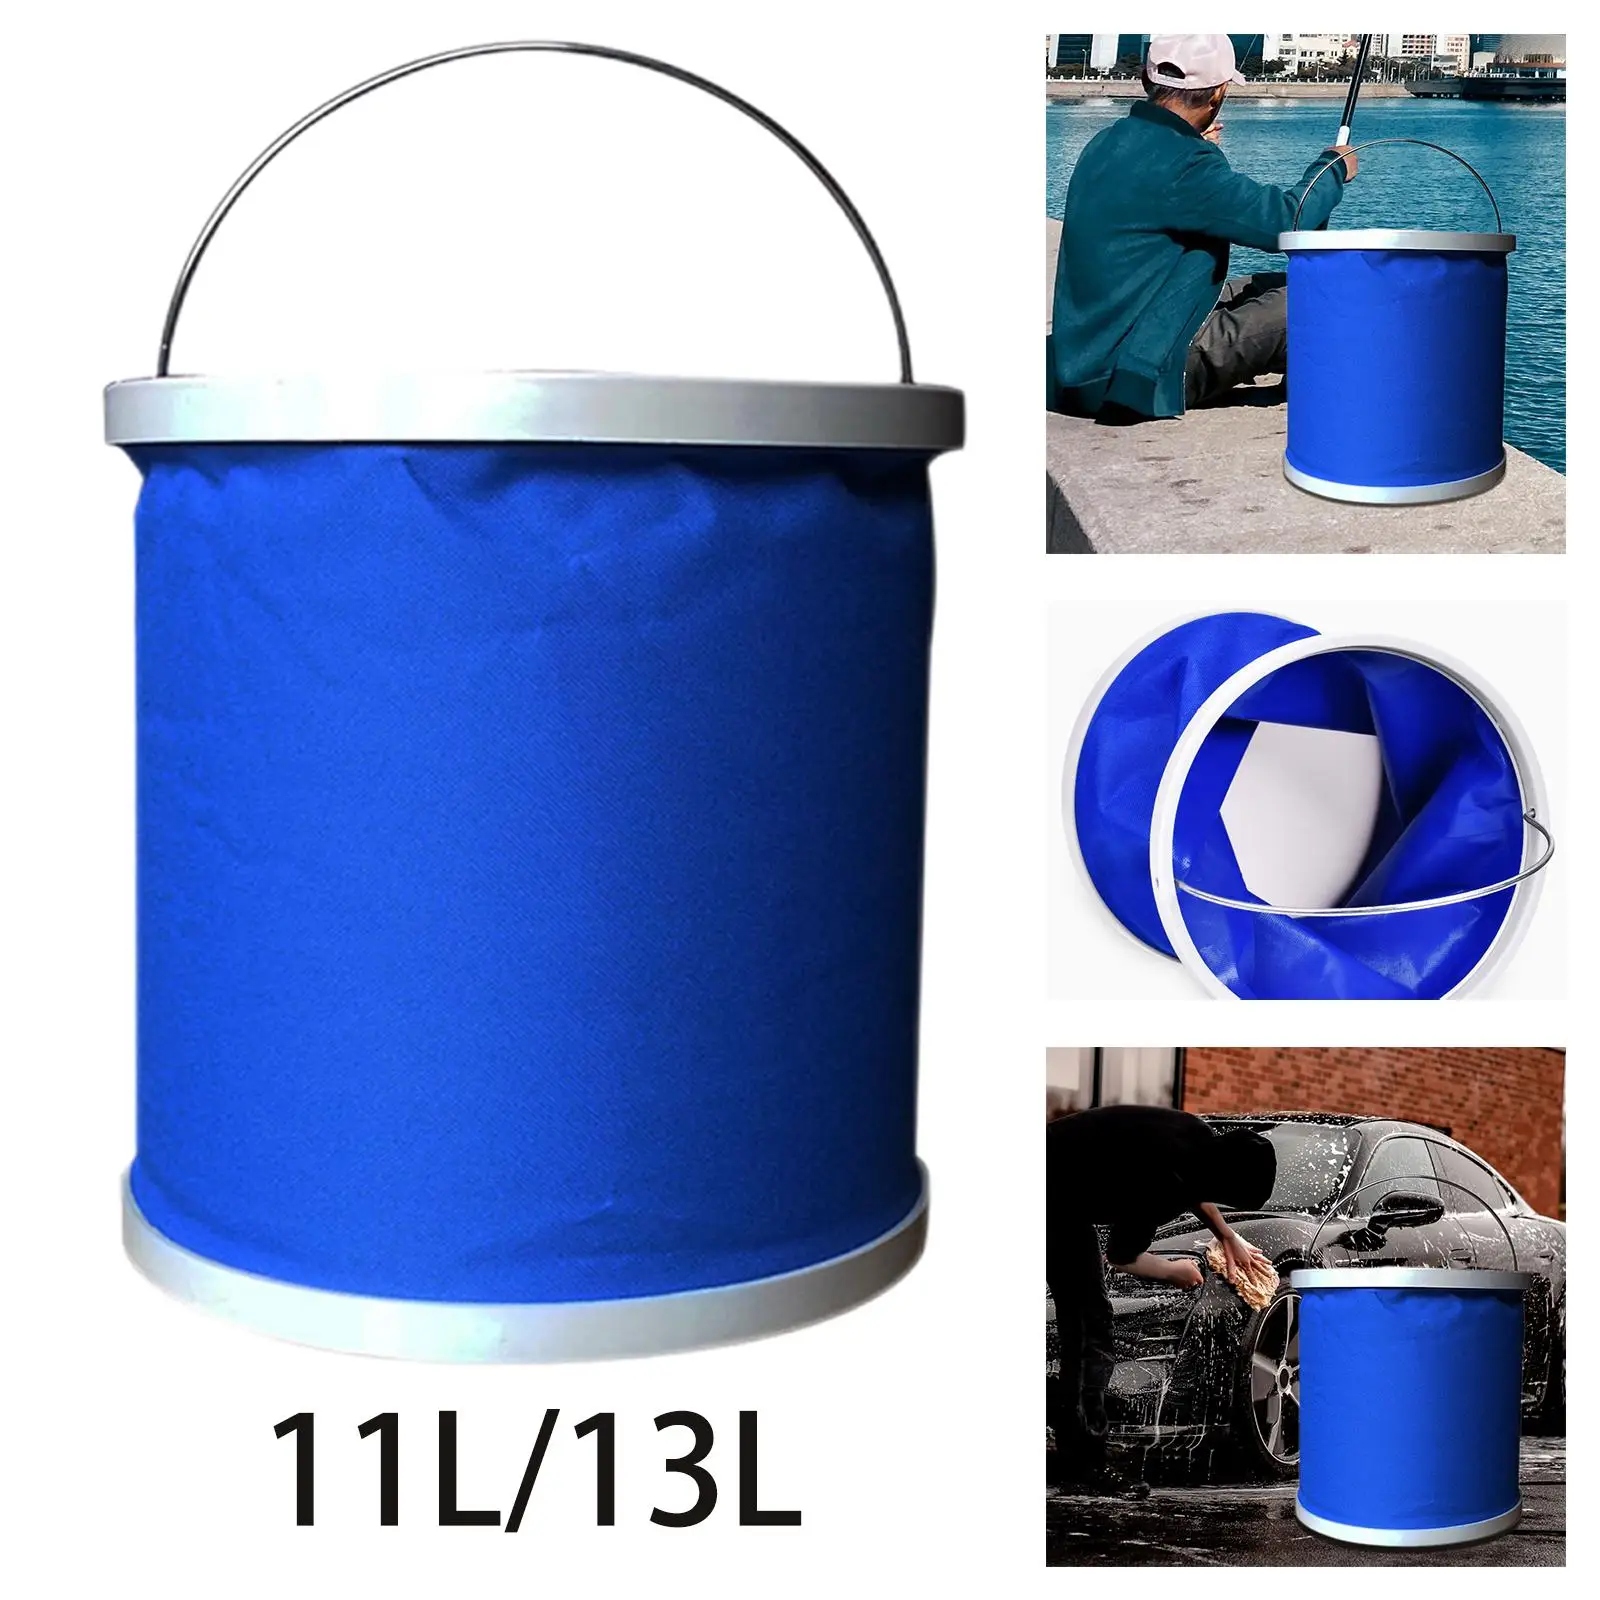 Folding Outdoor Collapsible Bucket Carrier Wash Basin Car Trash Cans Retractable Camping for Fishing Car Washing Hiking Picnic